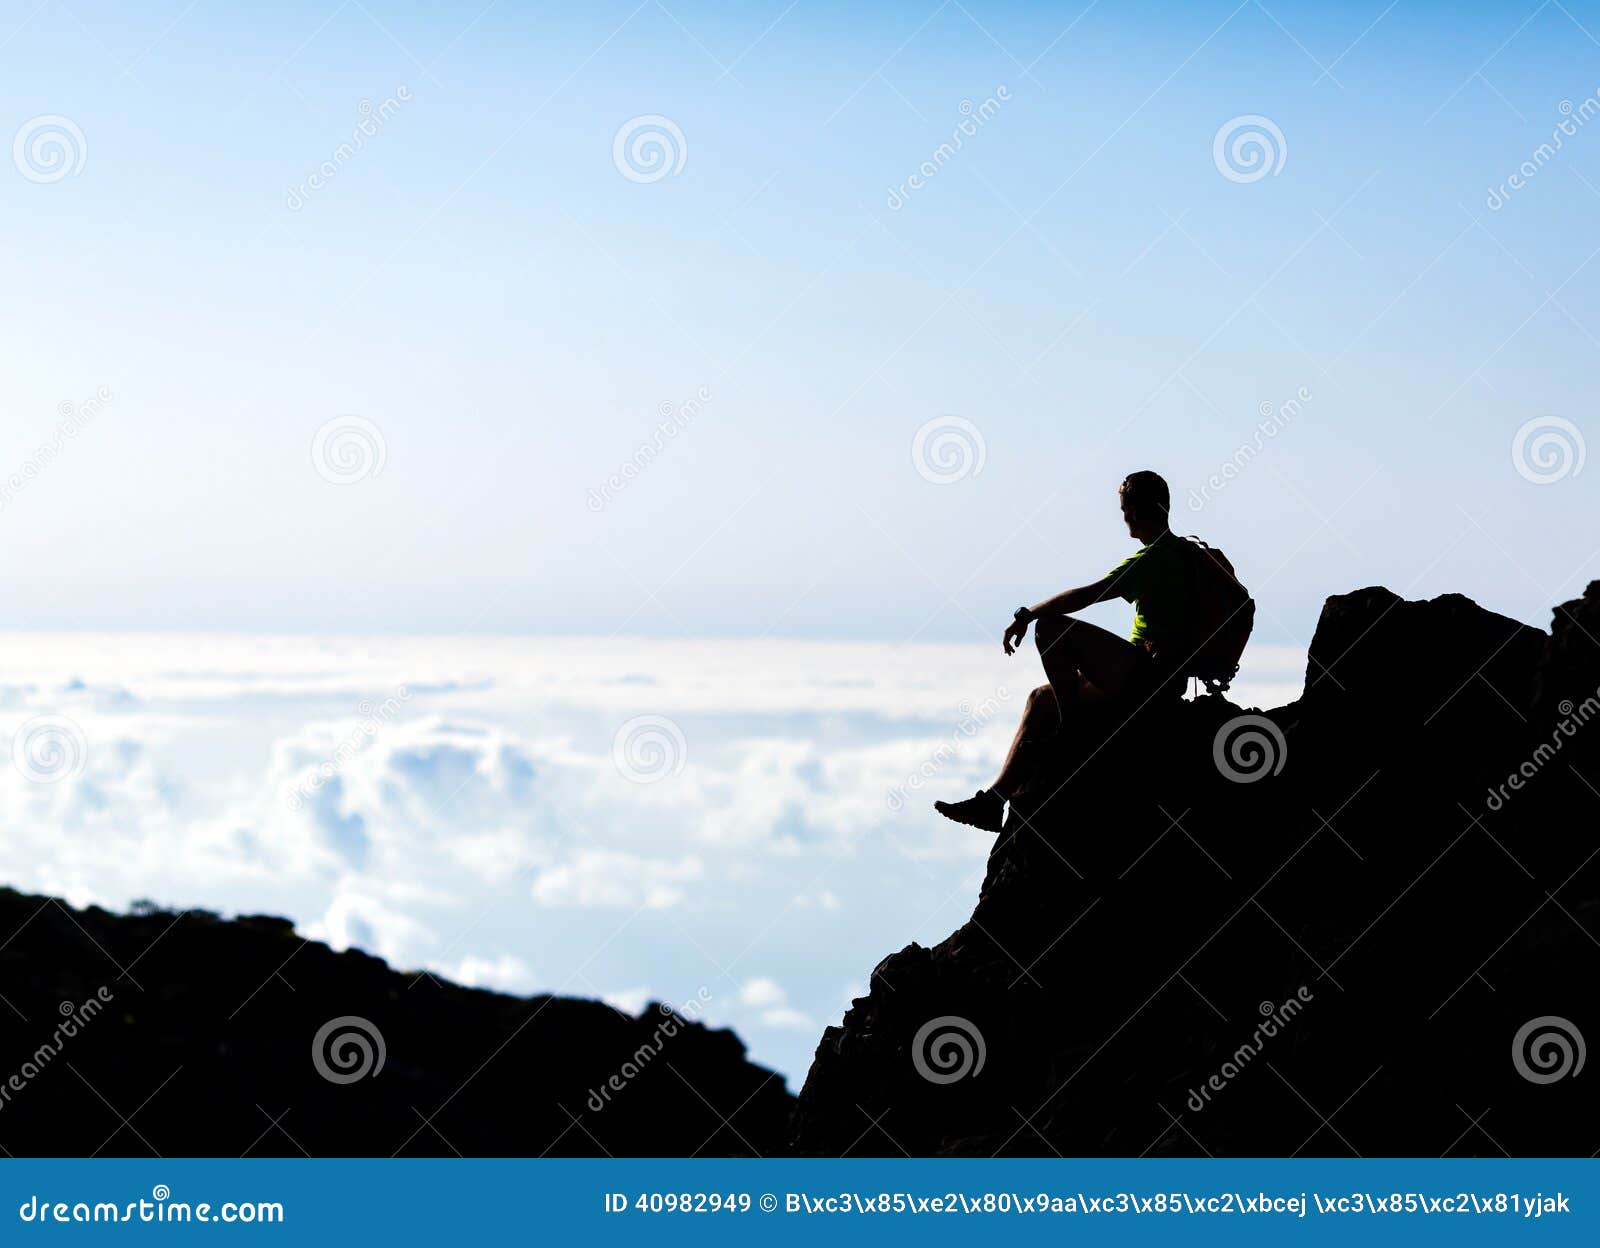 hiking silhouette backpacker, man trail runner in mountains